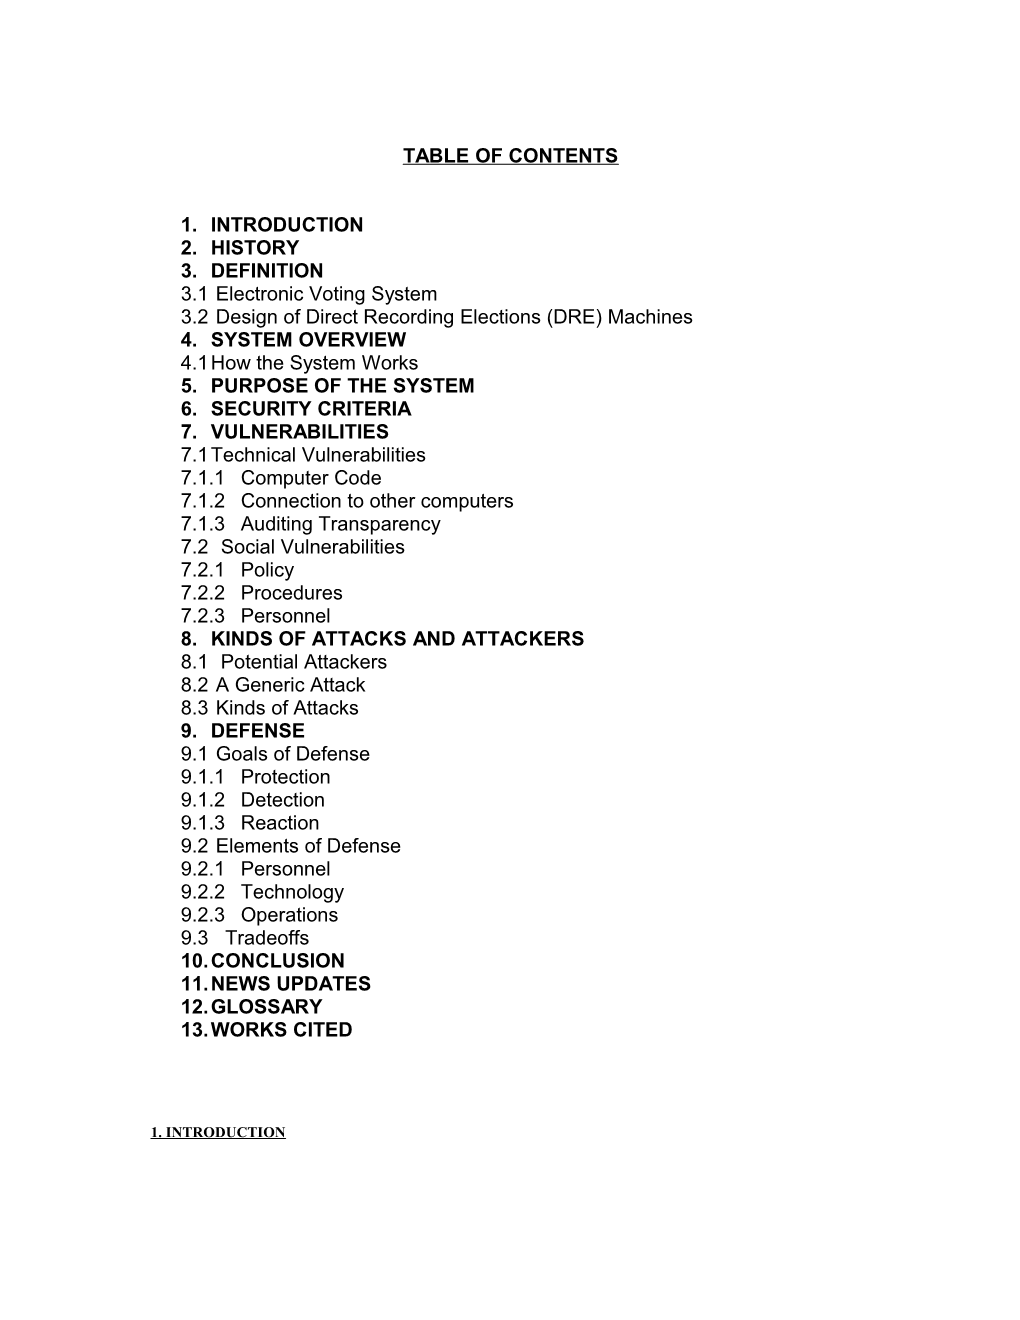 Table of Contents s561